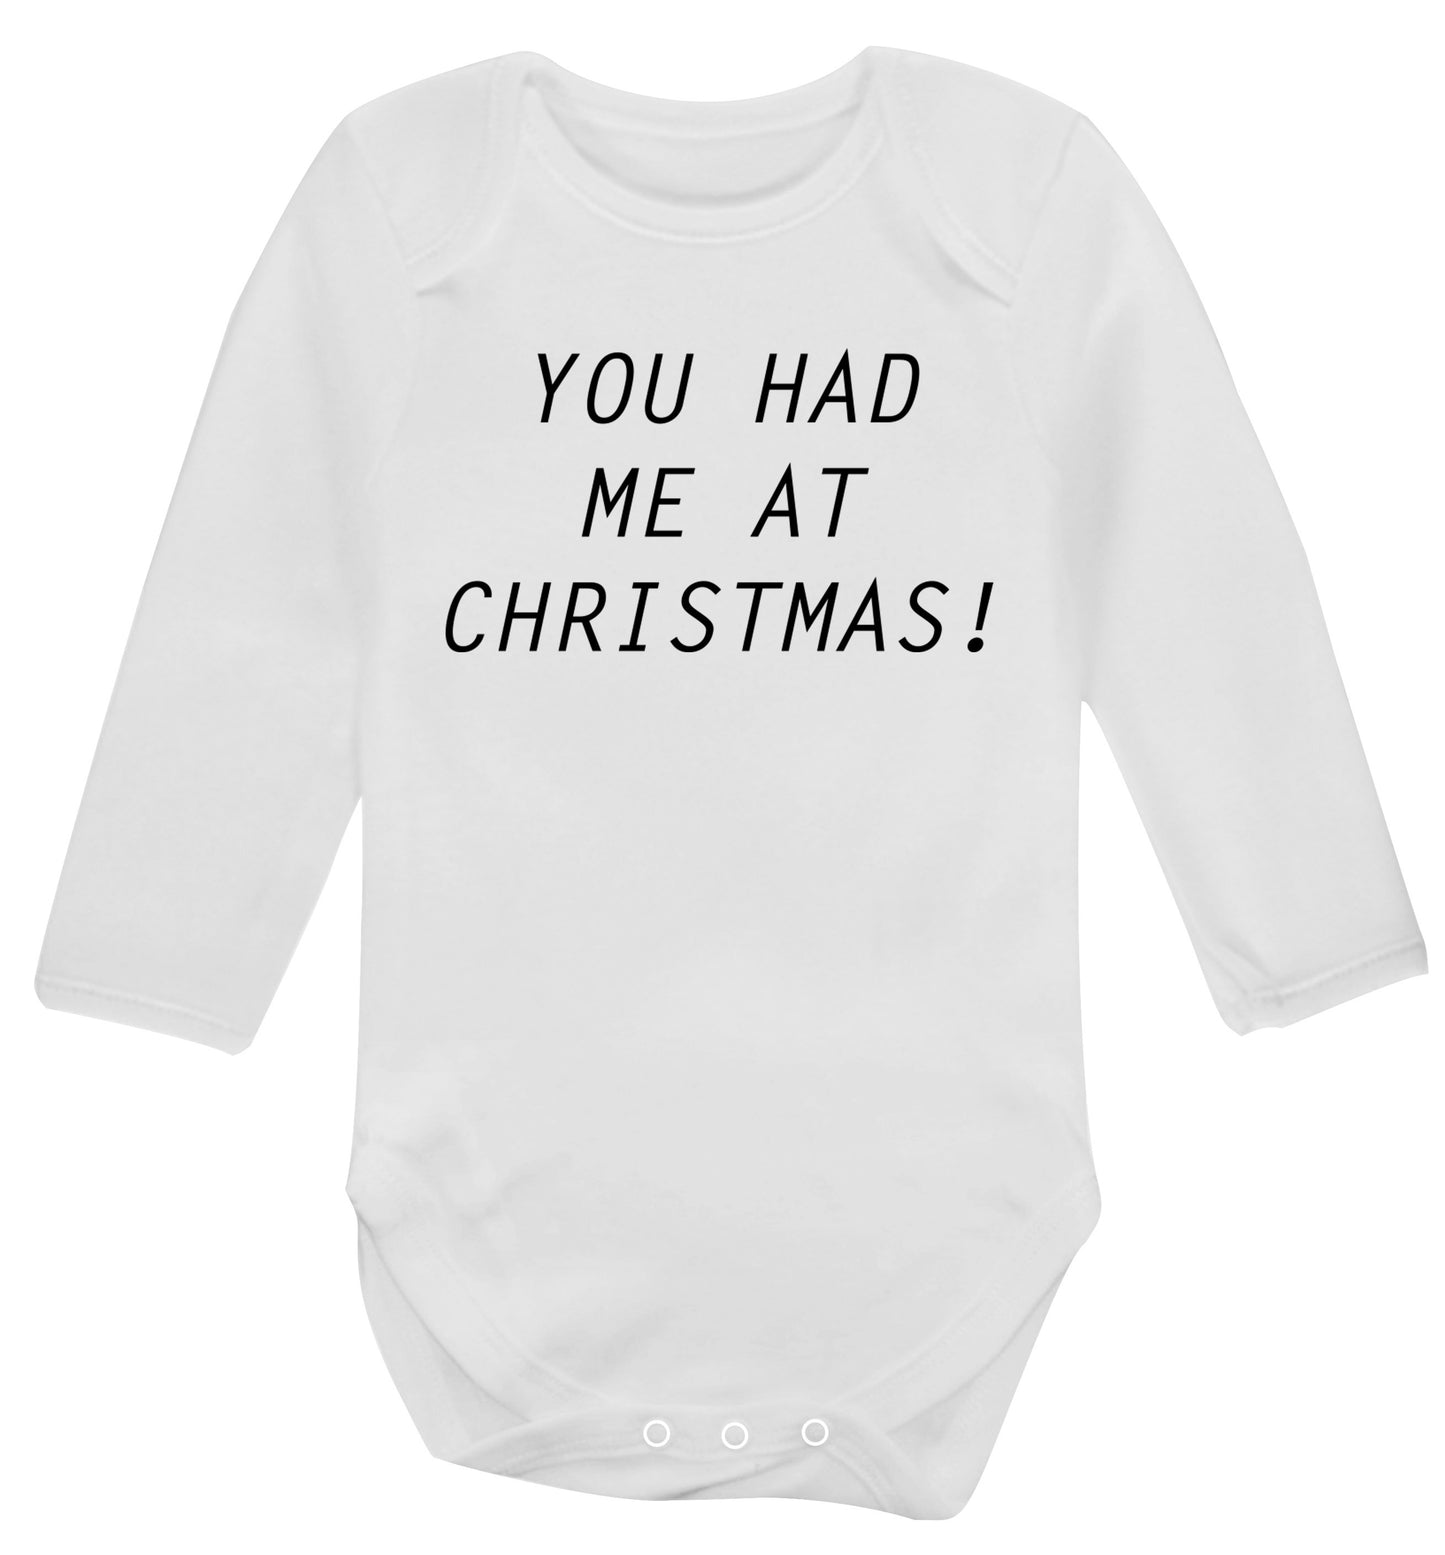 You had me at Christmas Baby Vest long sleeved white 6-12 months